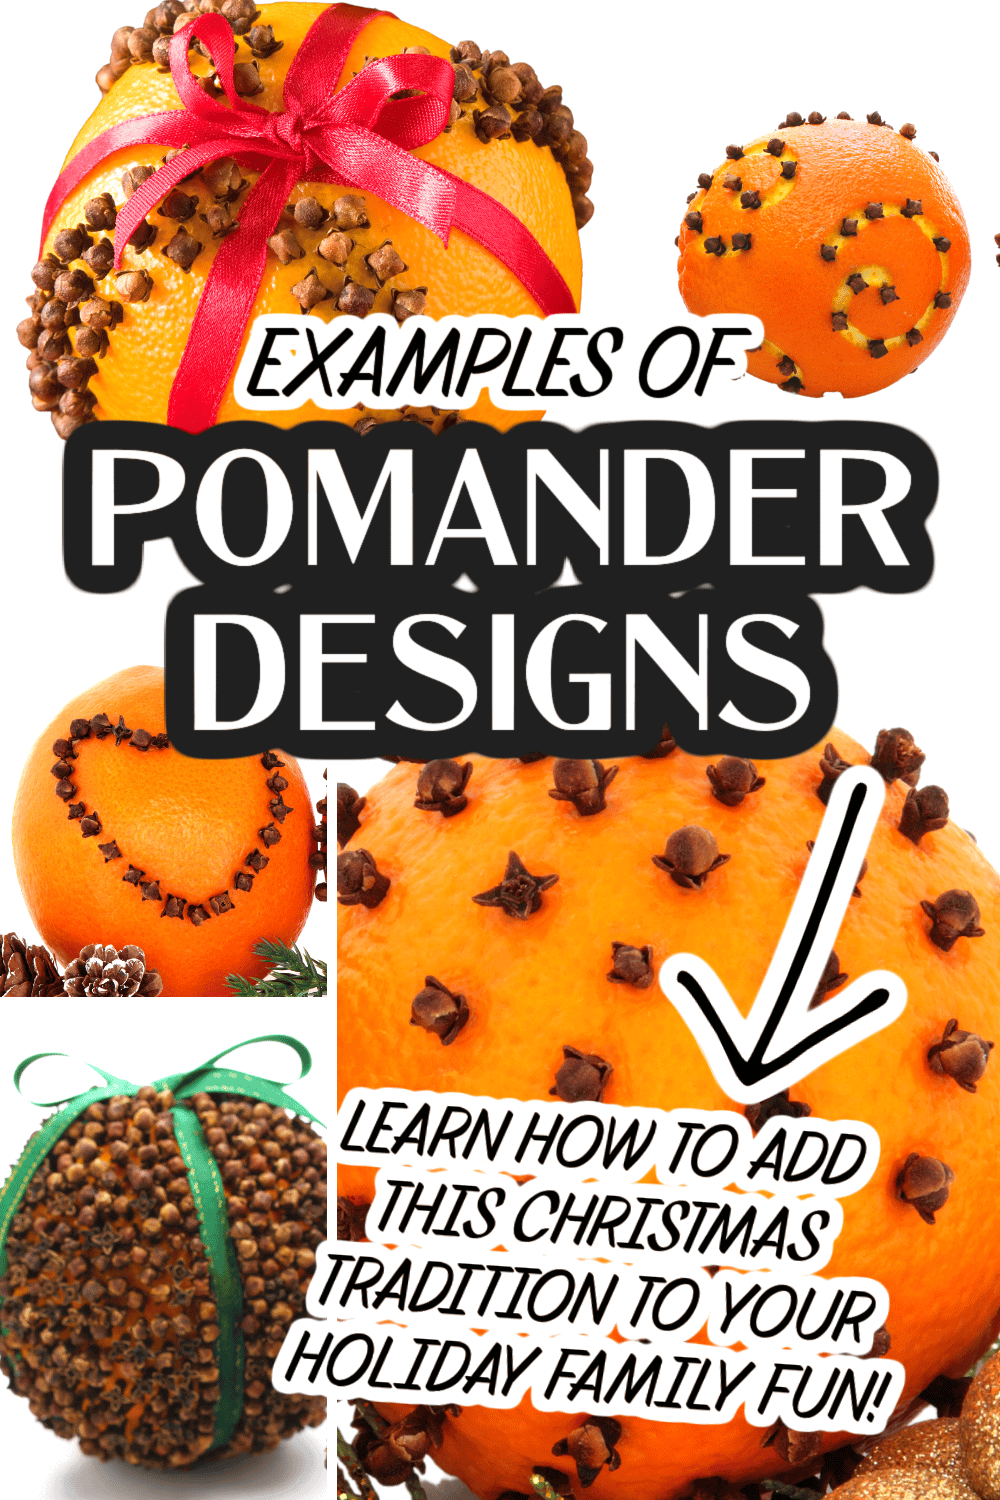 Different Examples of pomander ball designs (pomander balls Christmas ornaments / orange pomander designs) with text on top